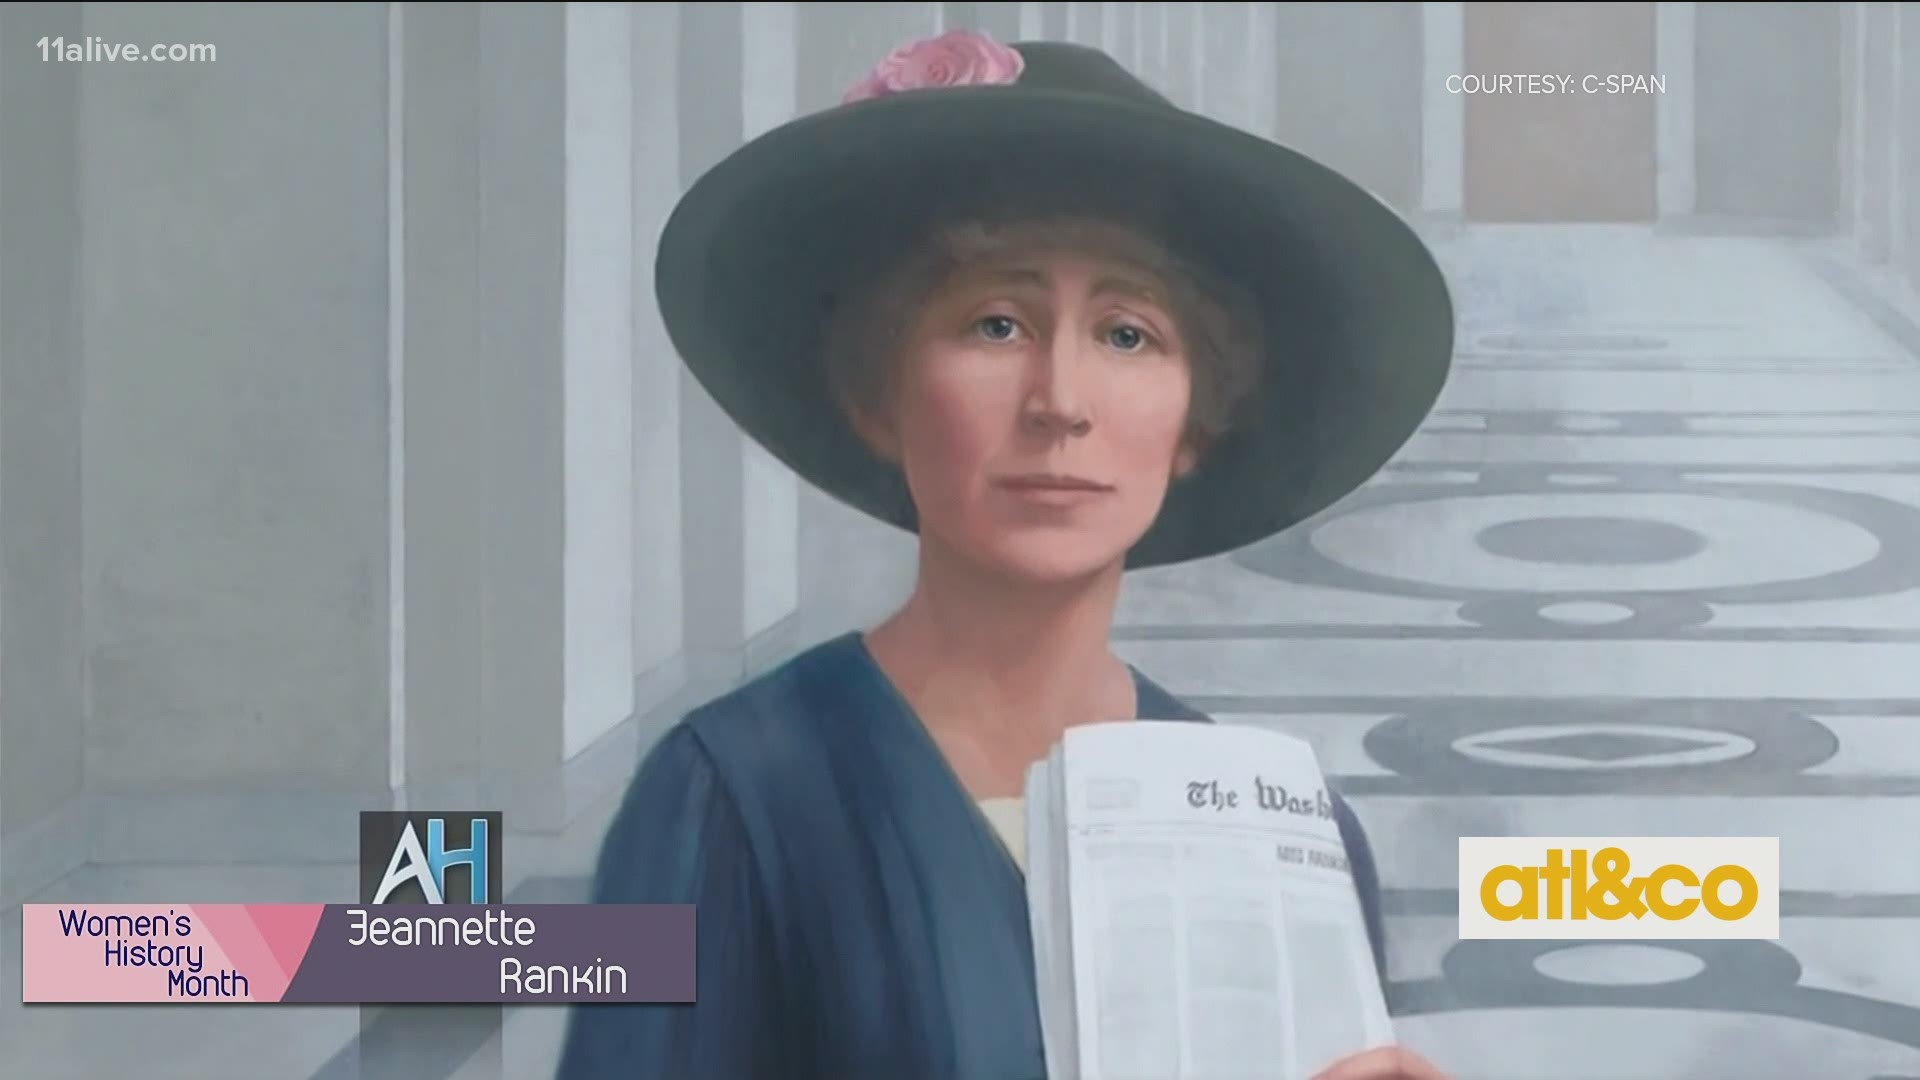 Women's rights advocate Jeannette Rankin was the first woman to hold federal office in the United States. She was elected to the House of Representatives in 1916.